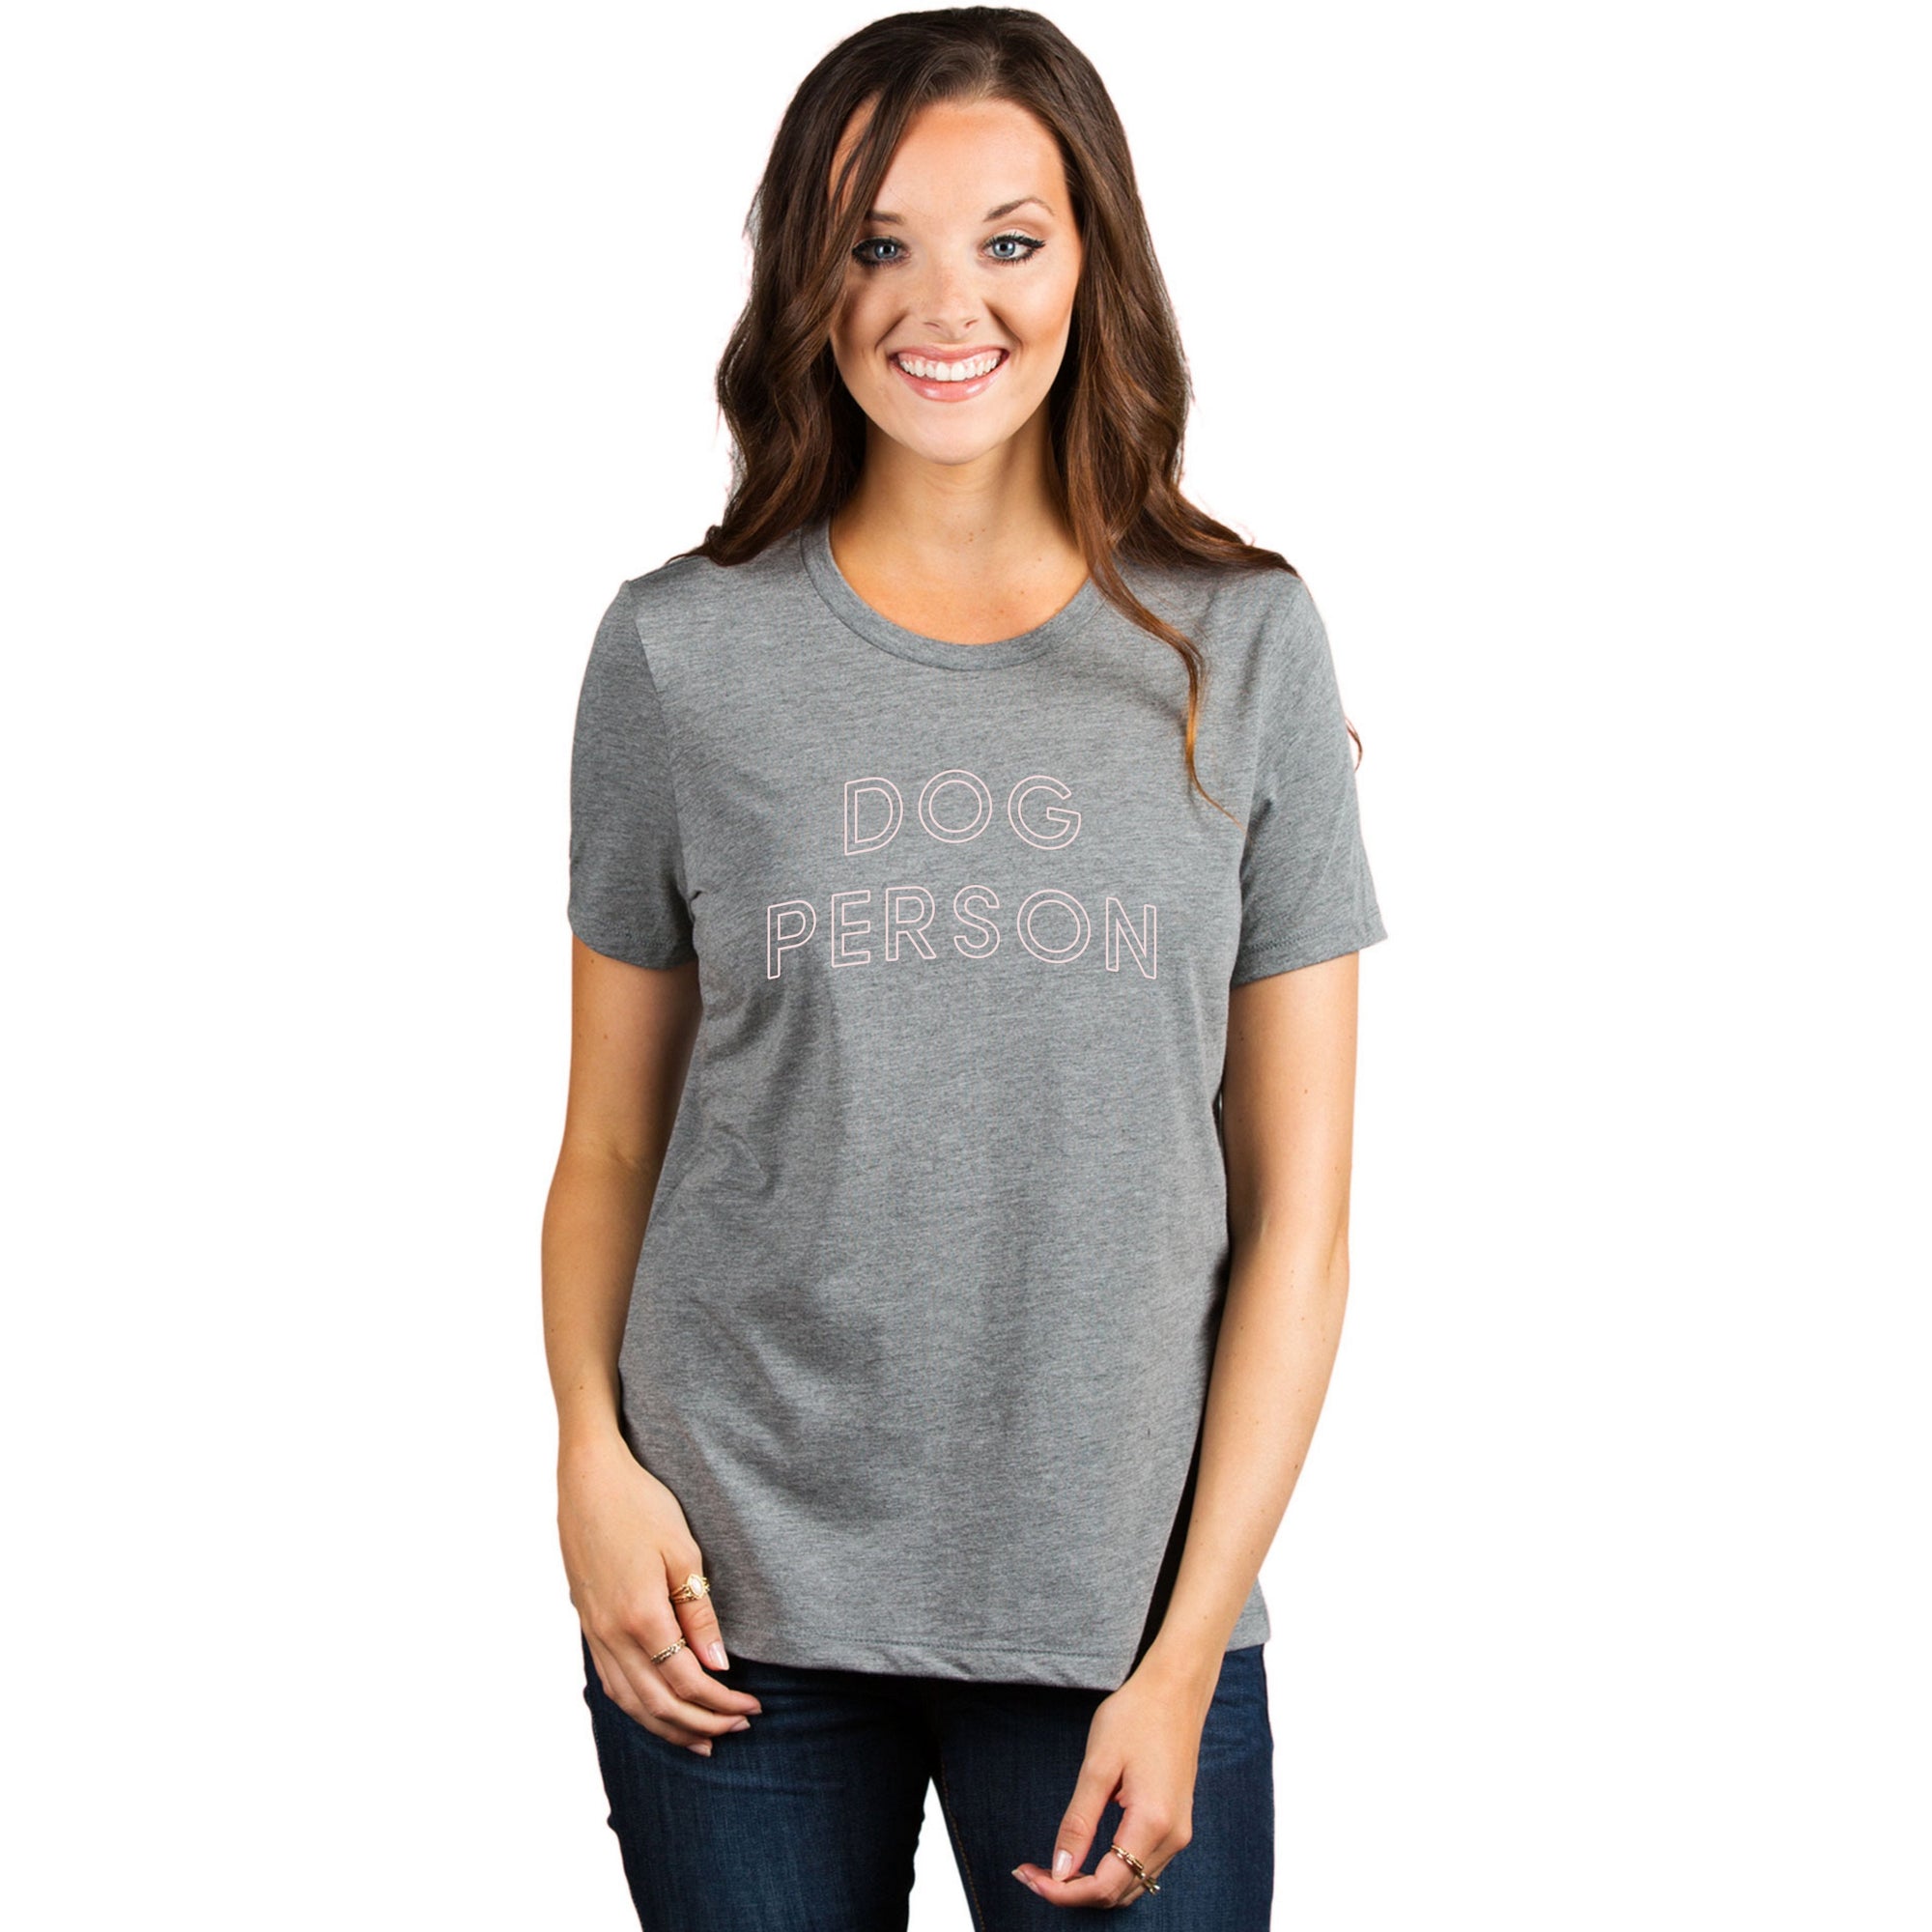 Dog Person Women's Relaxed Crewneck T-Shirt Top Tee Heather Grey Model
